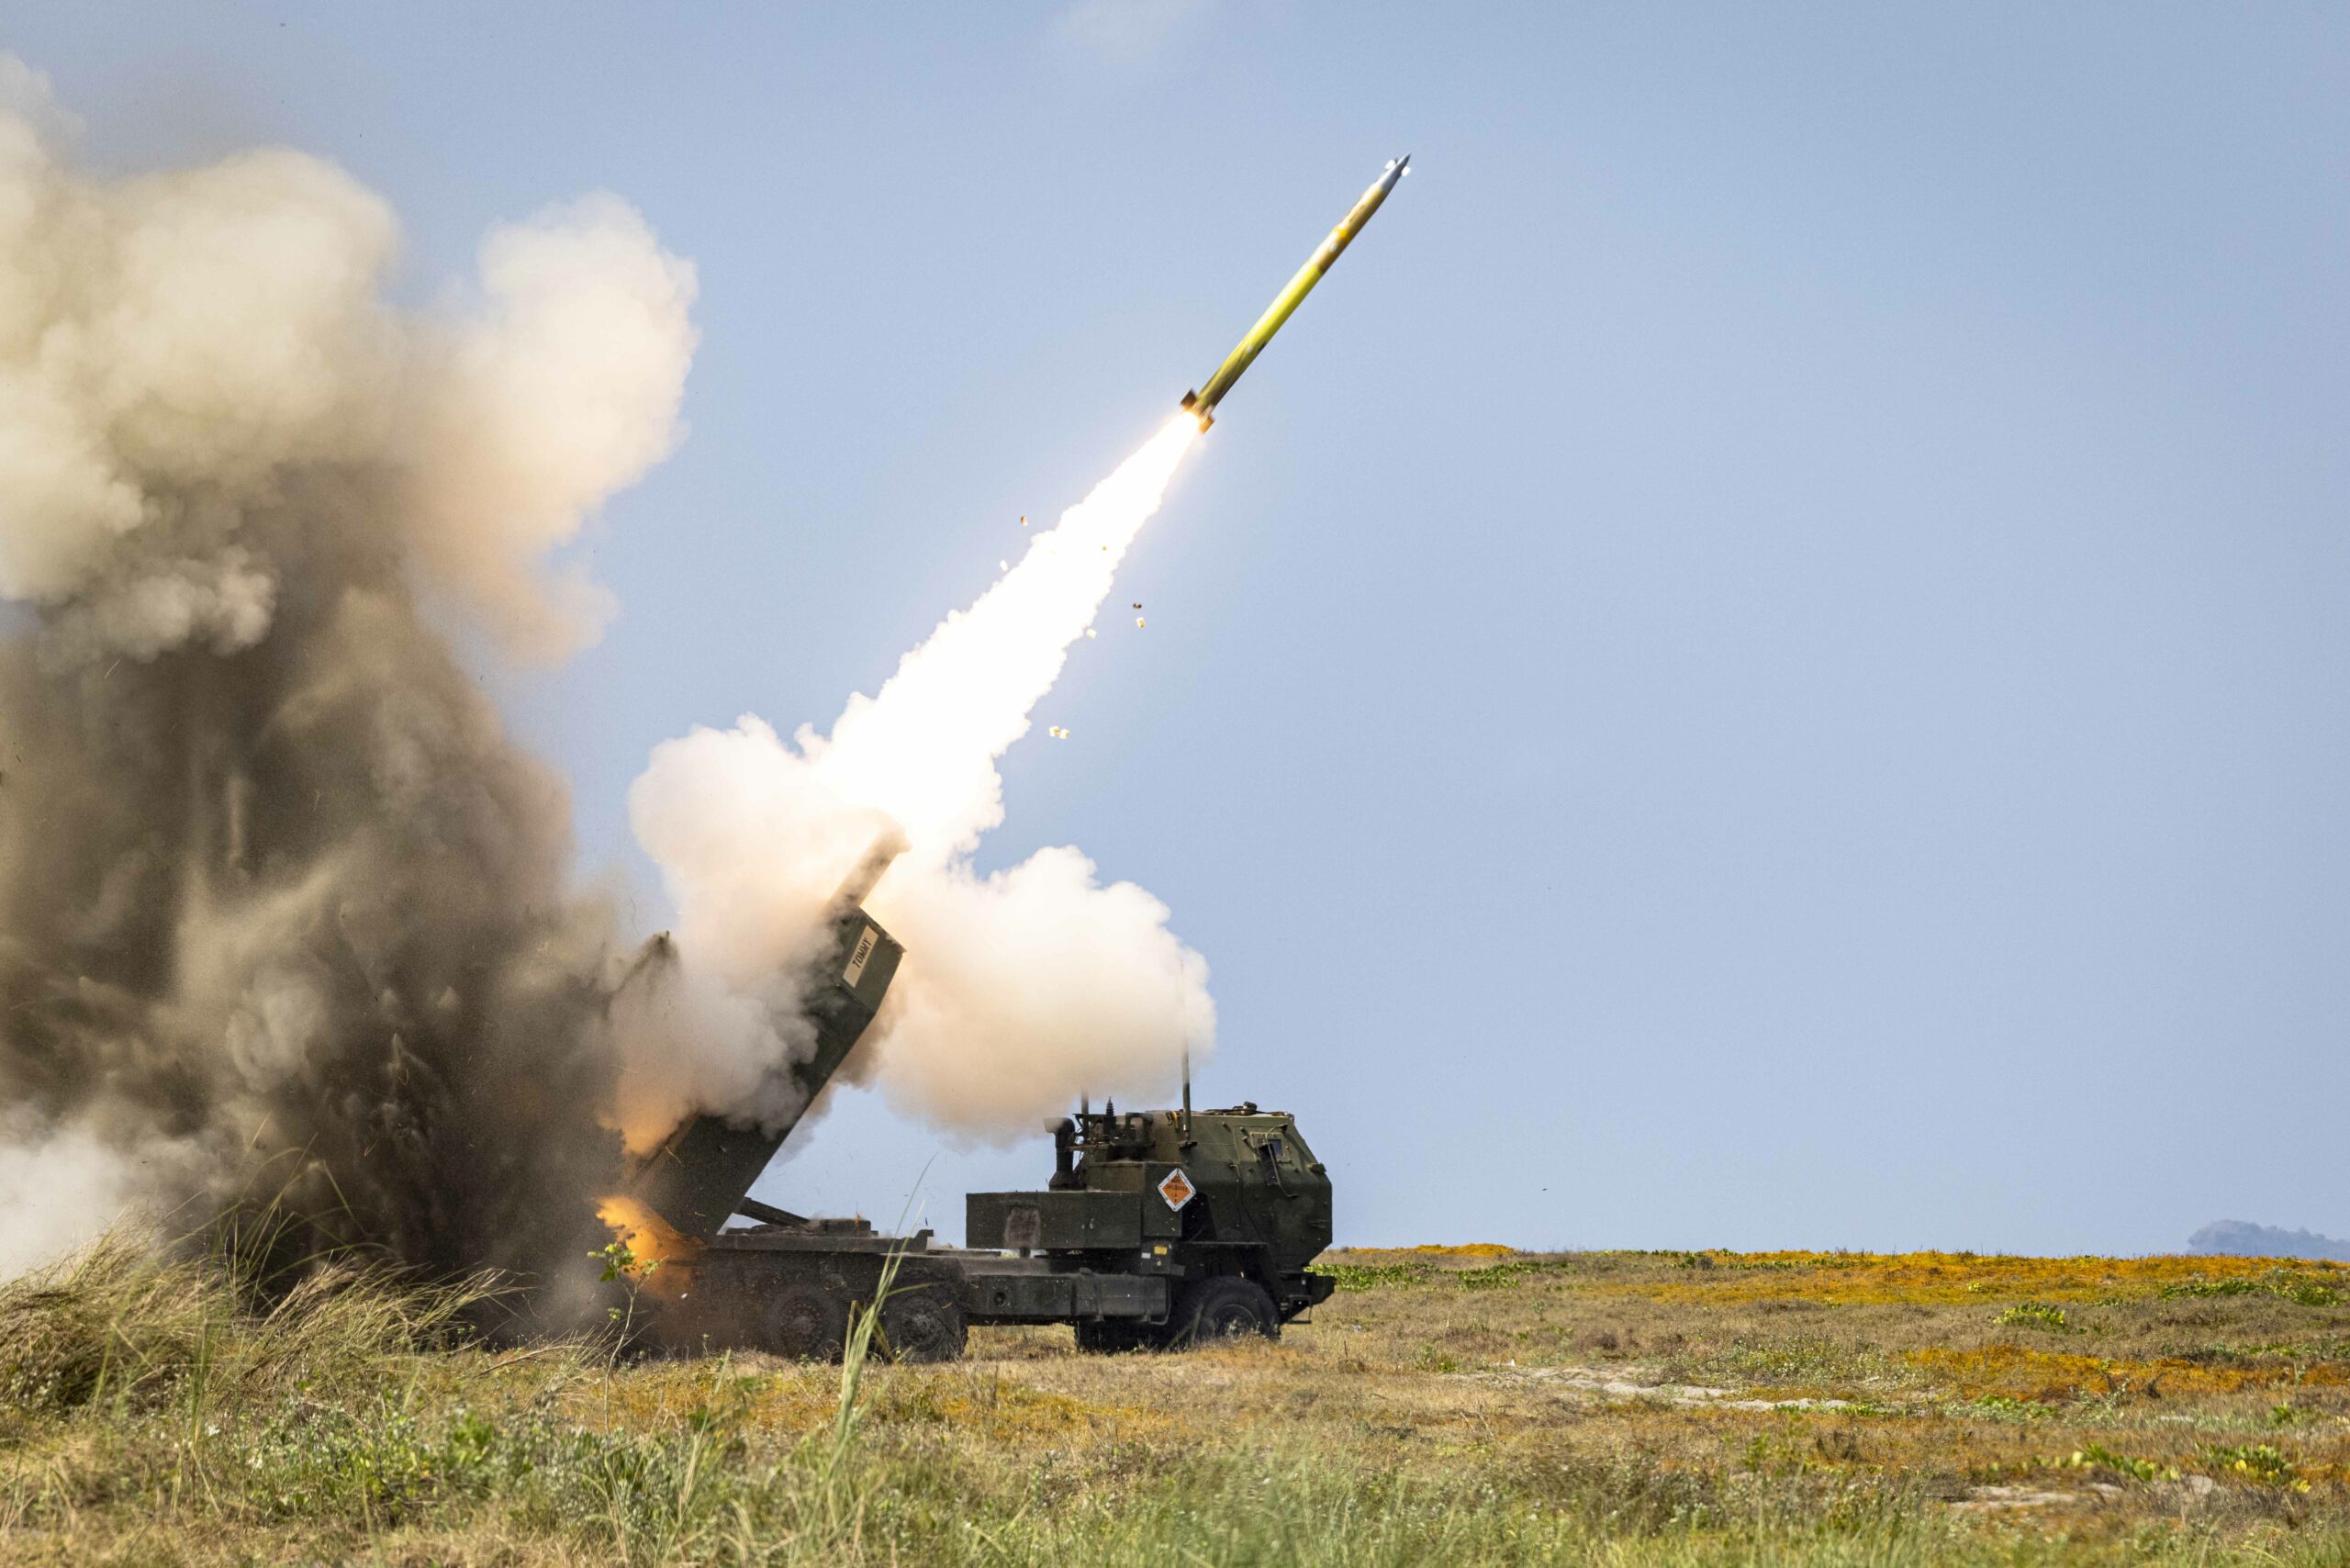 US HIMARS fires during a littoral live fire event